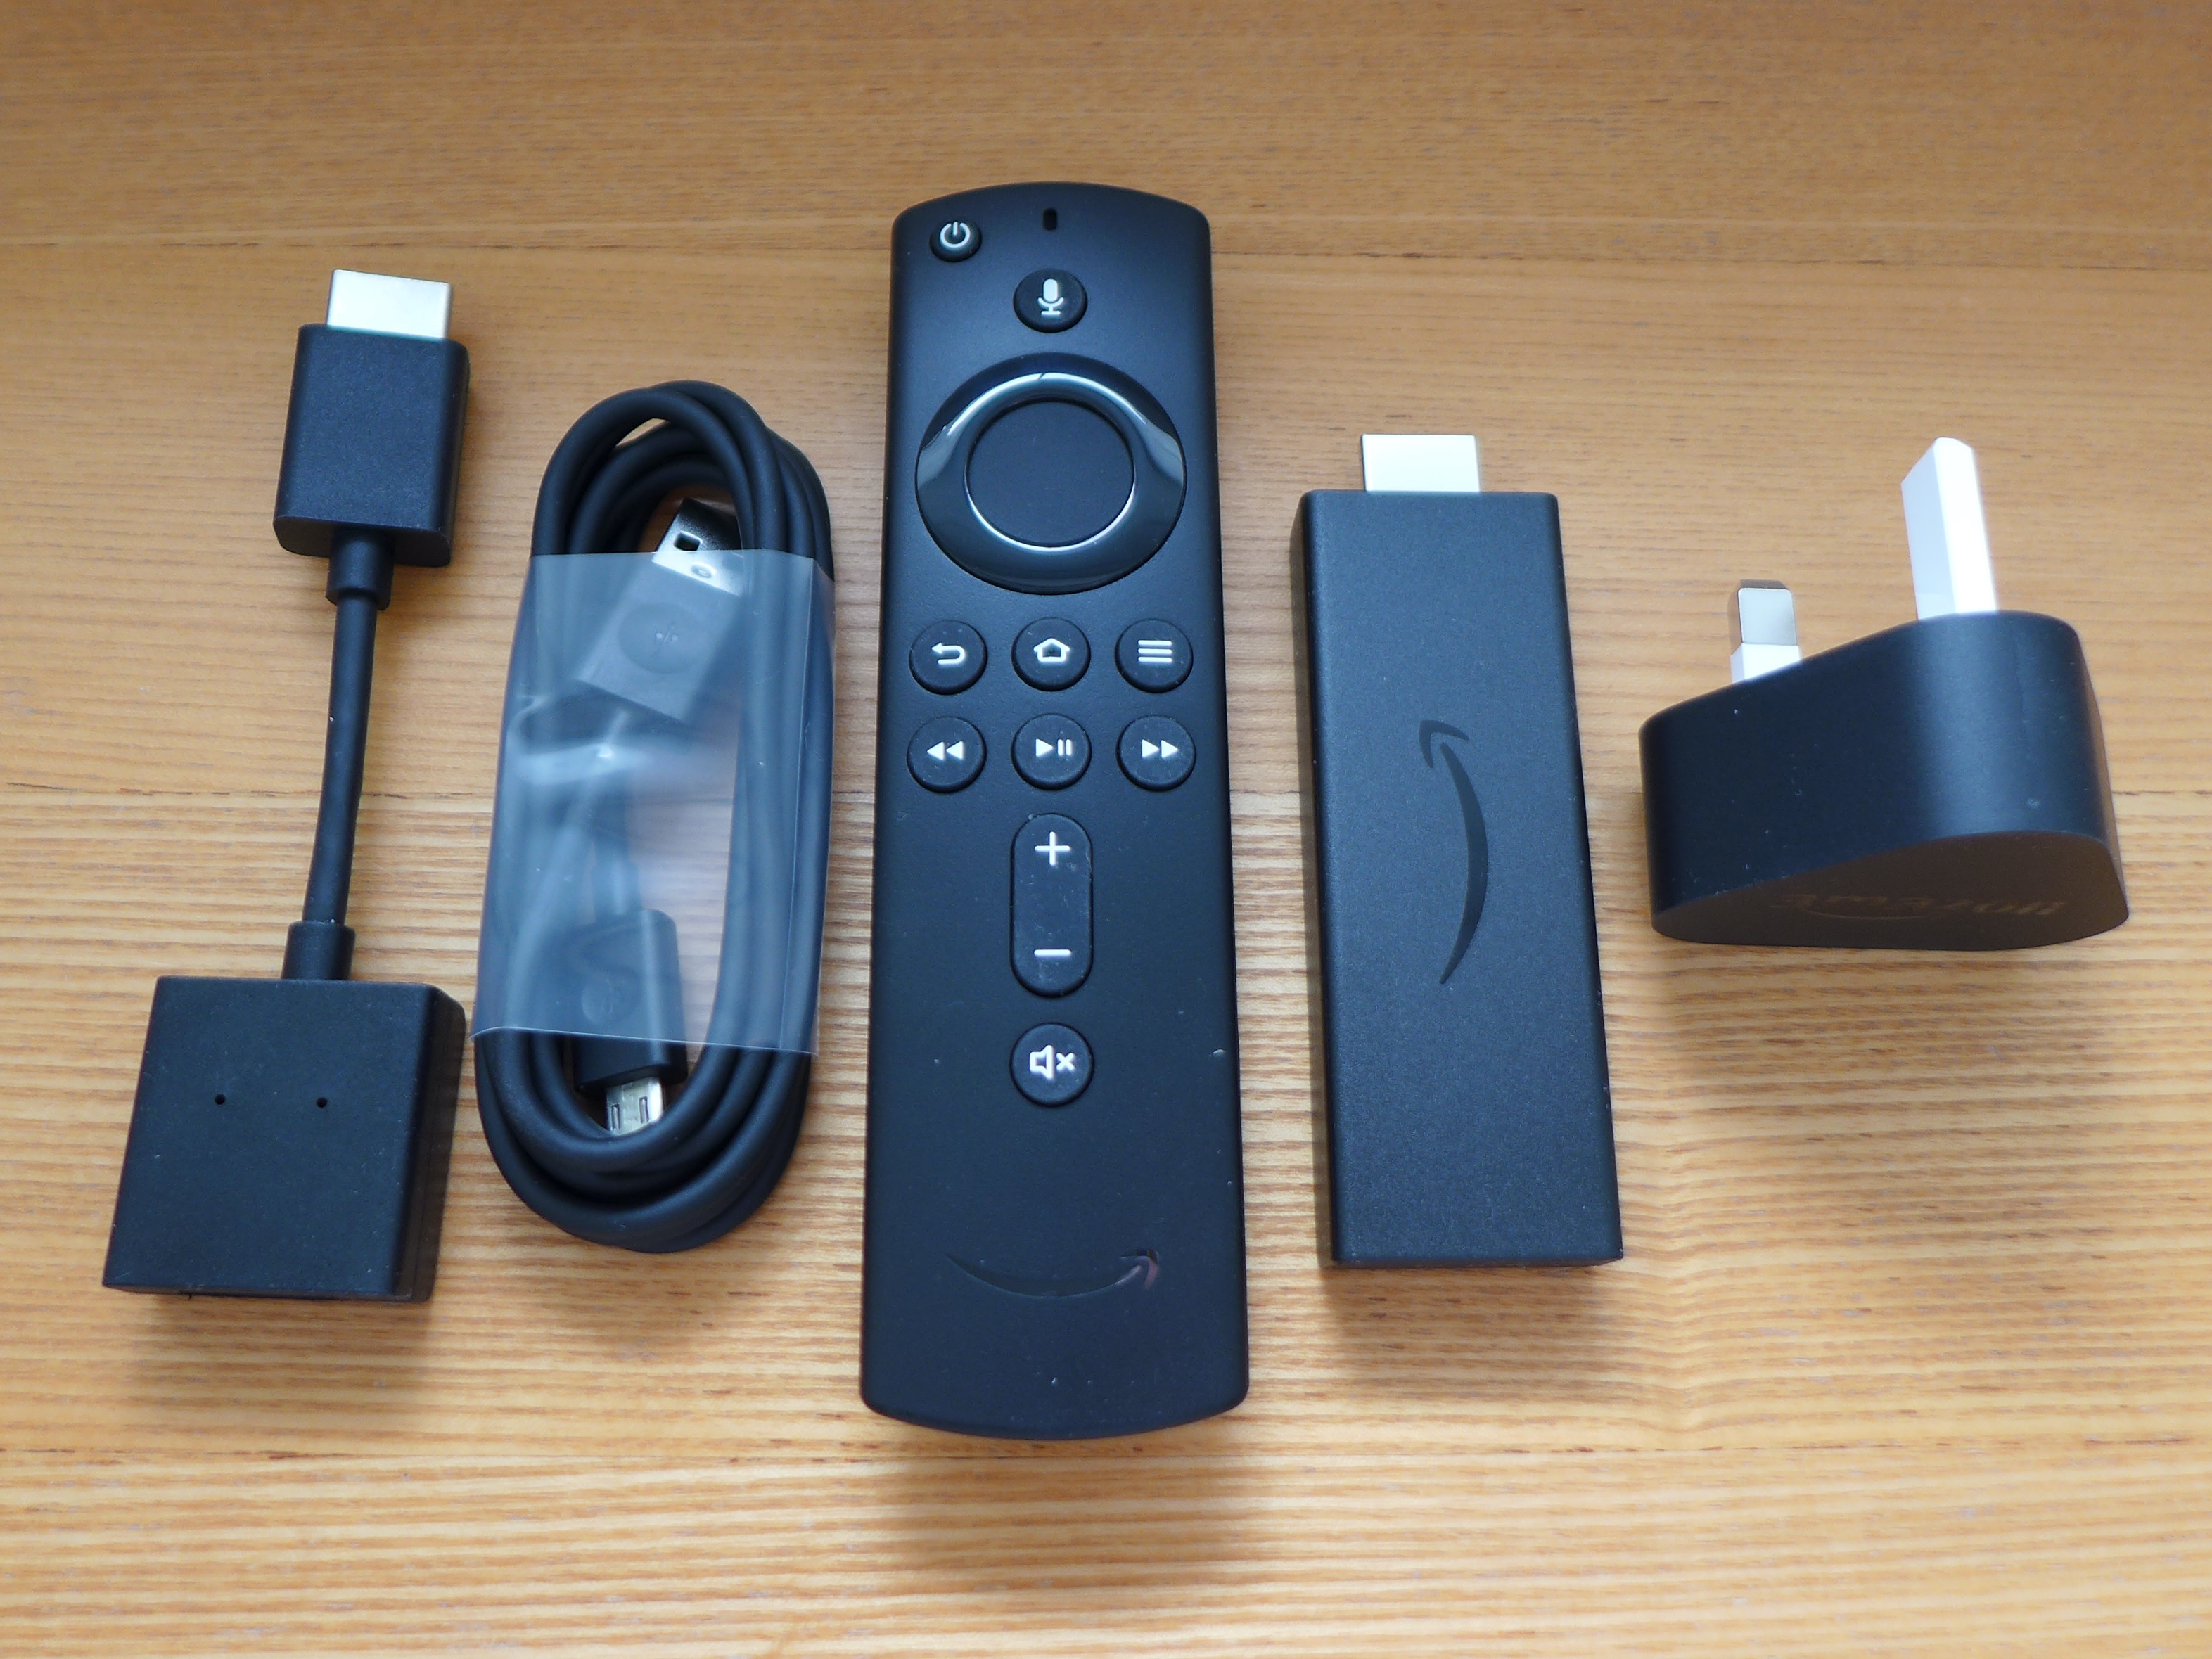 Fire TV Stick 2020 review